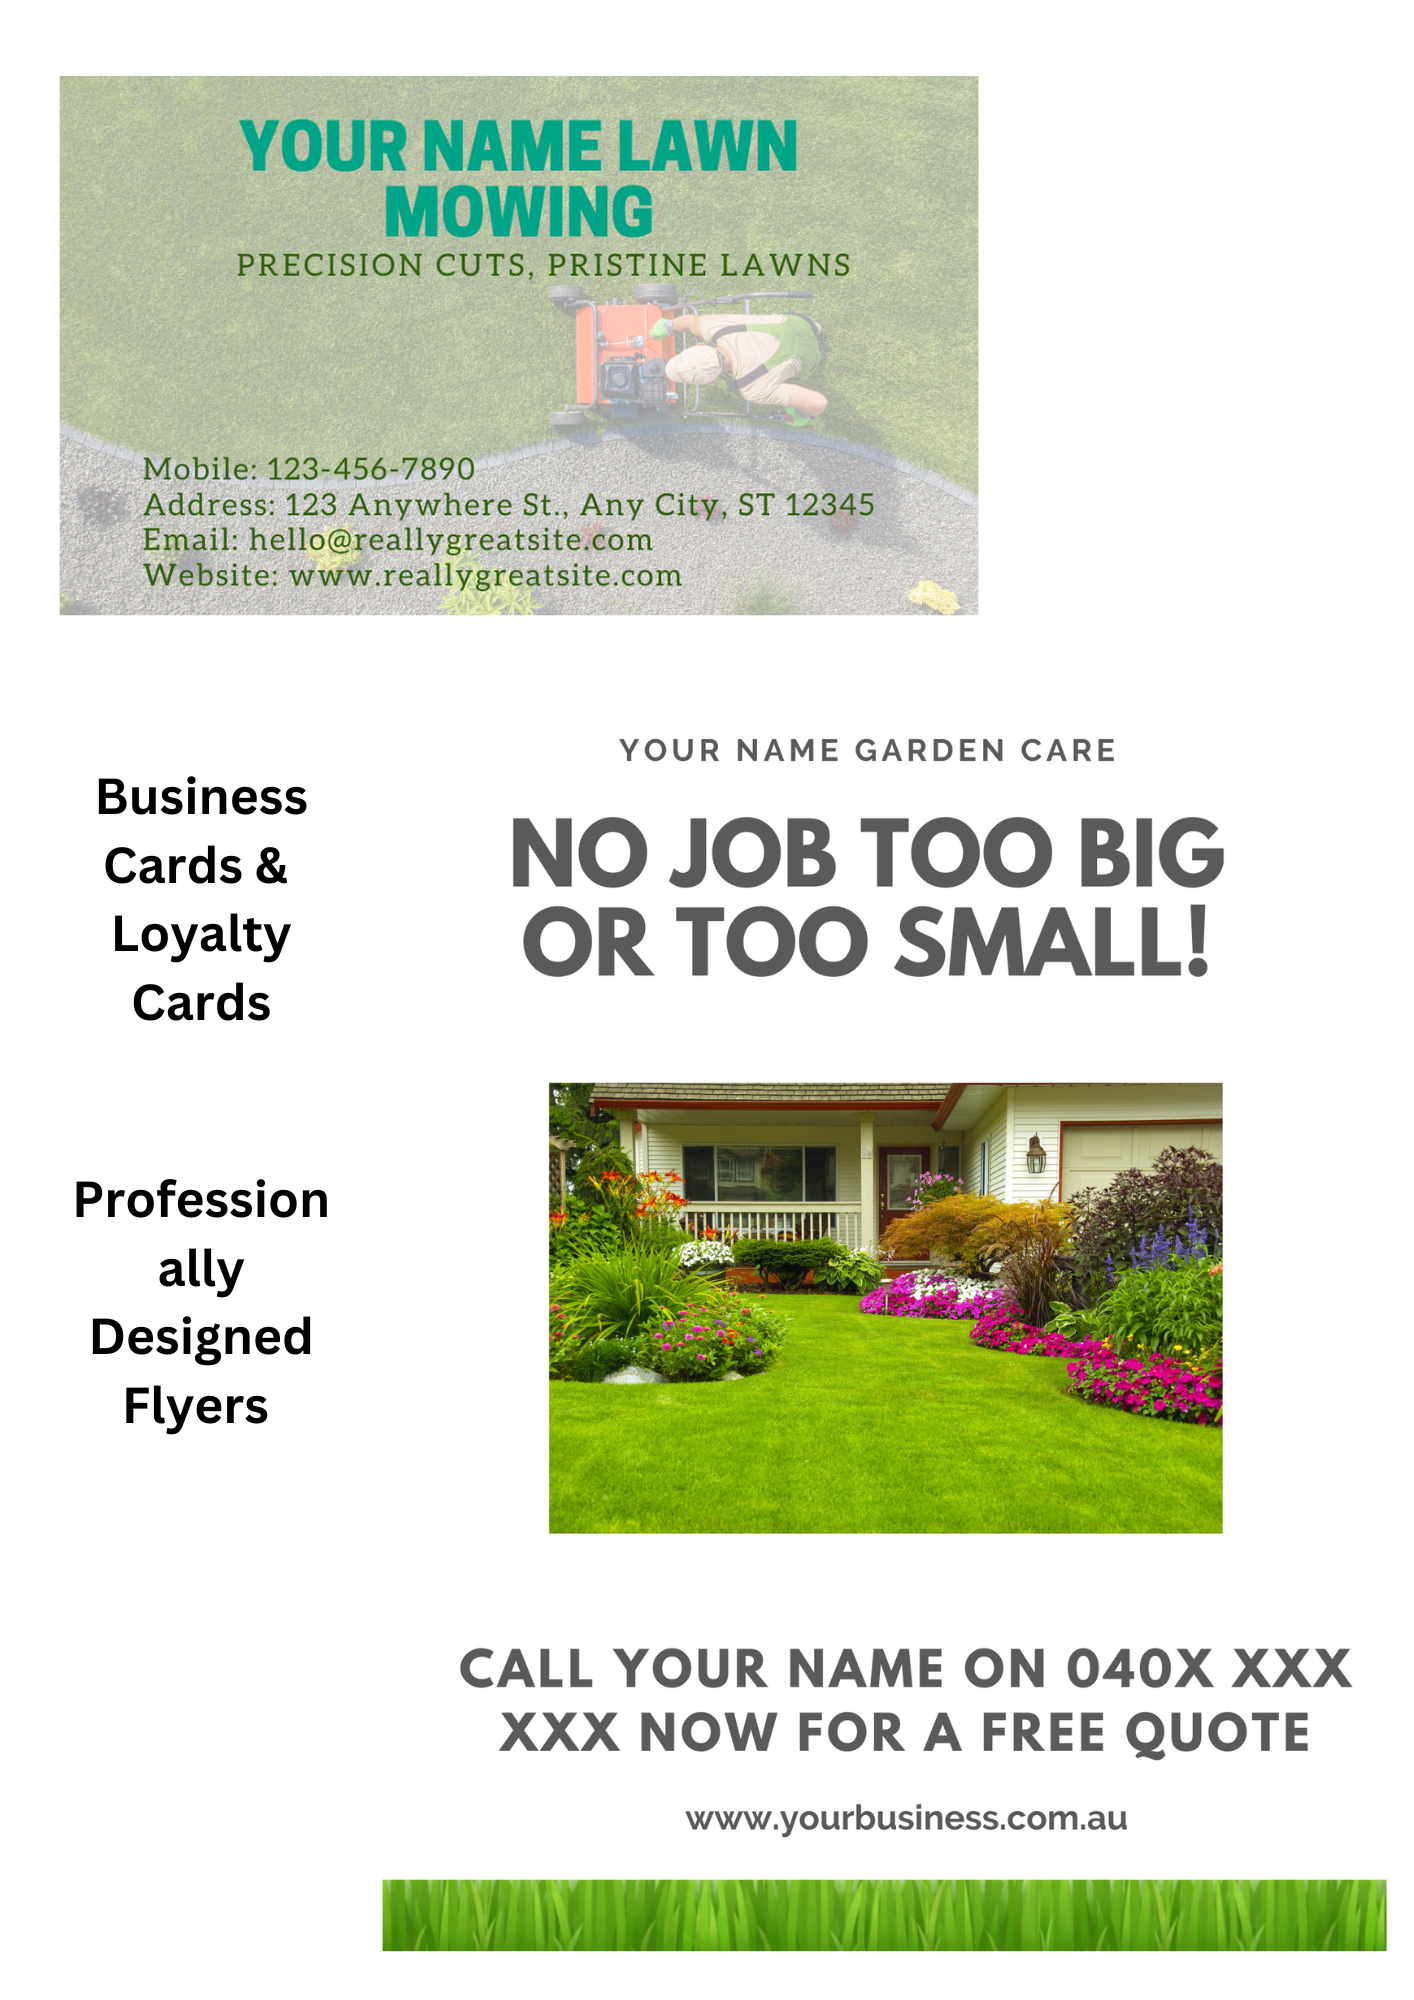 get your lawn mowing business started with Business Cards & Loyalty Cards